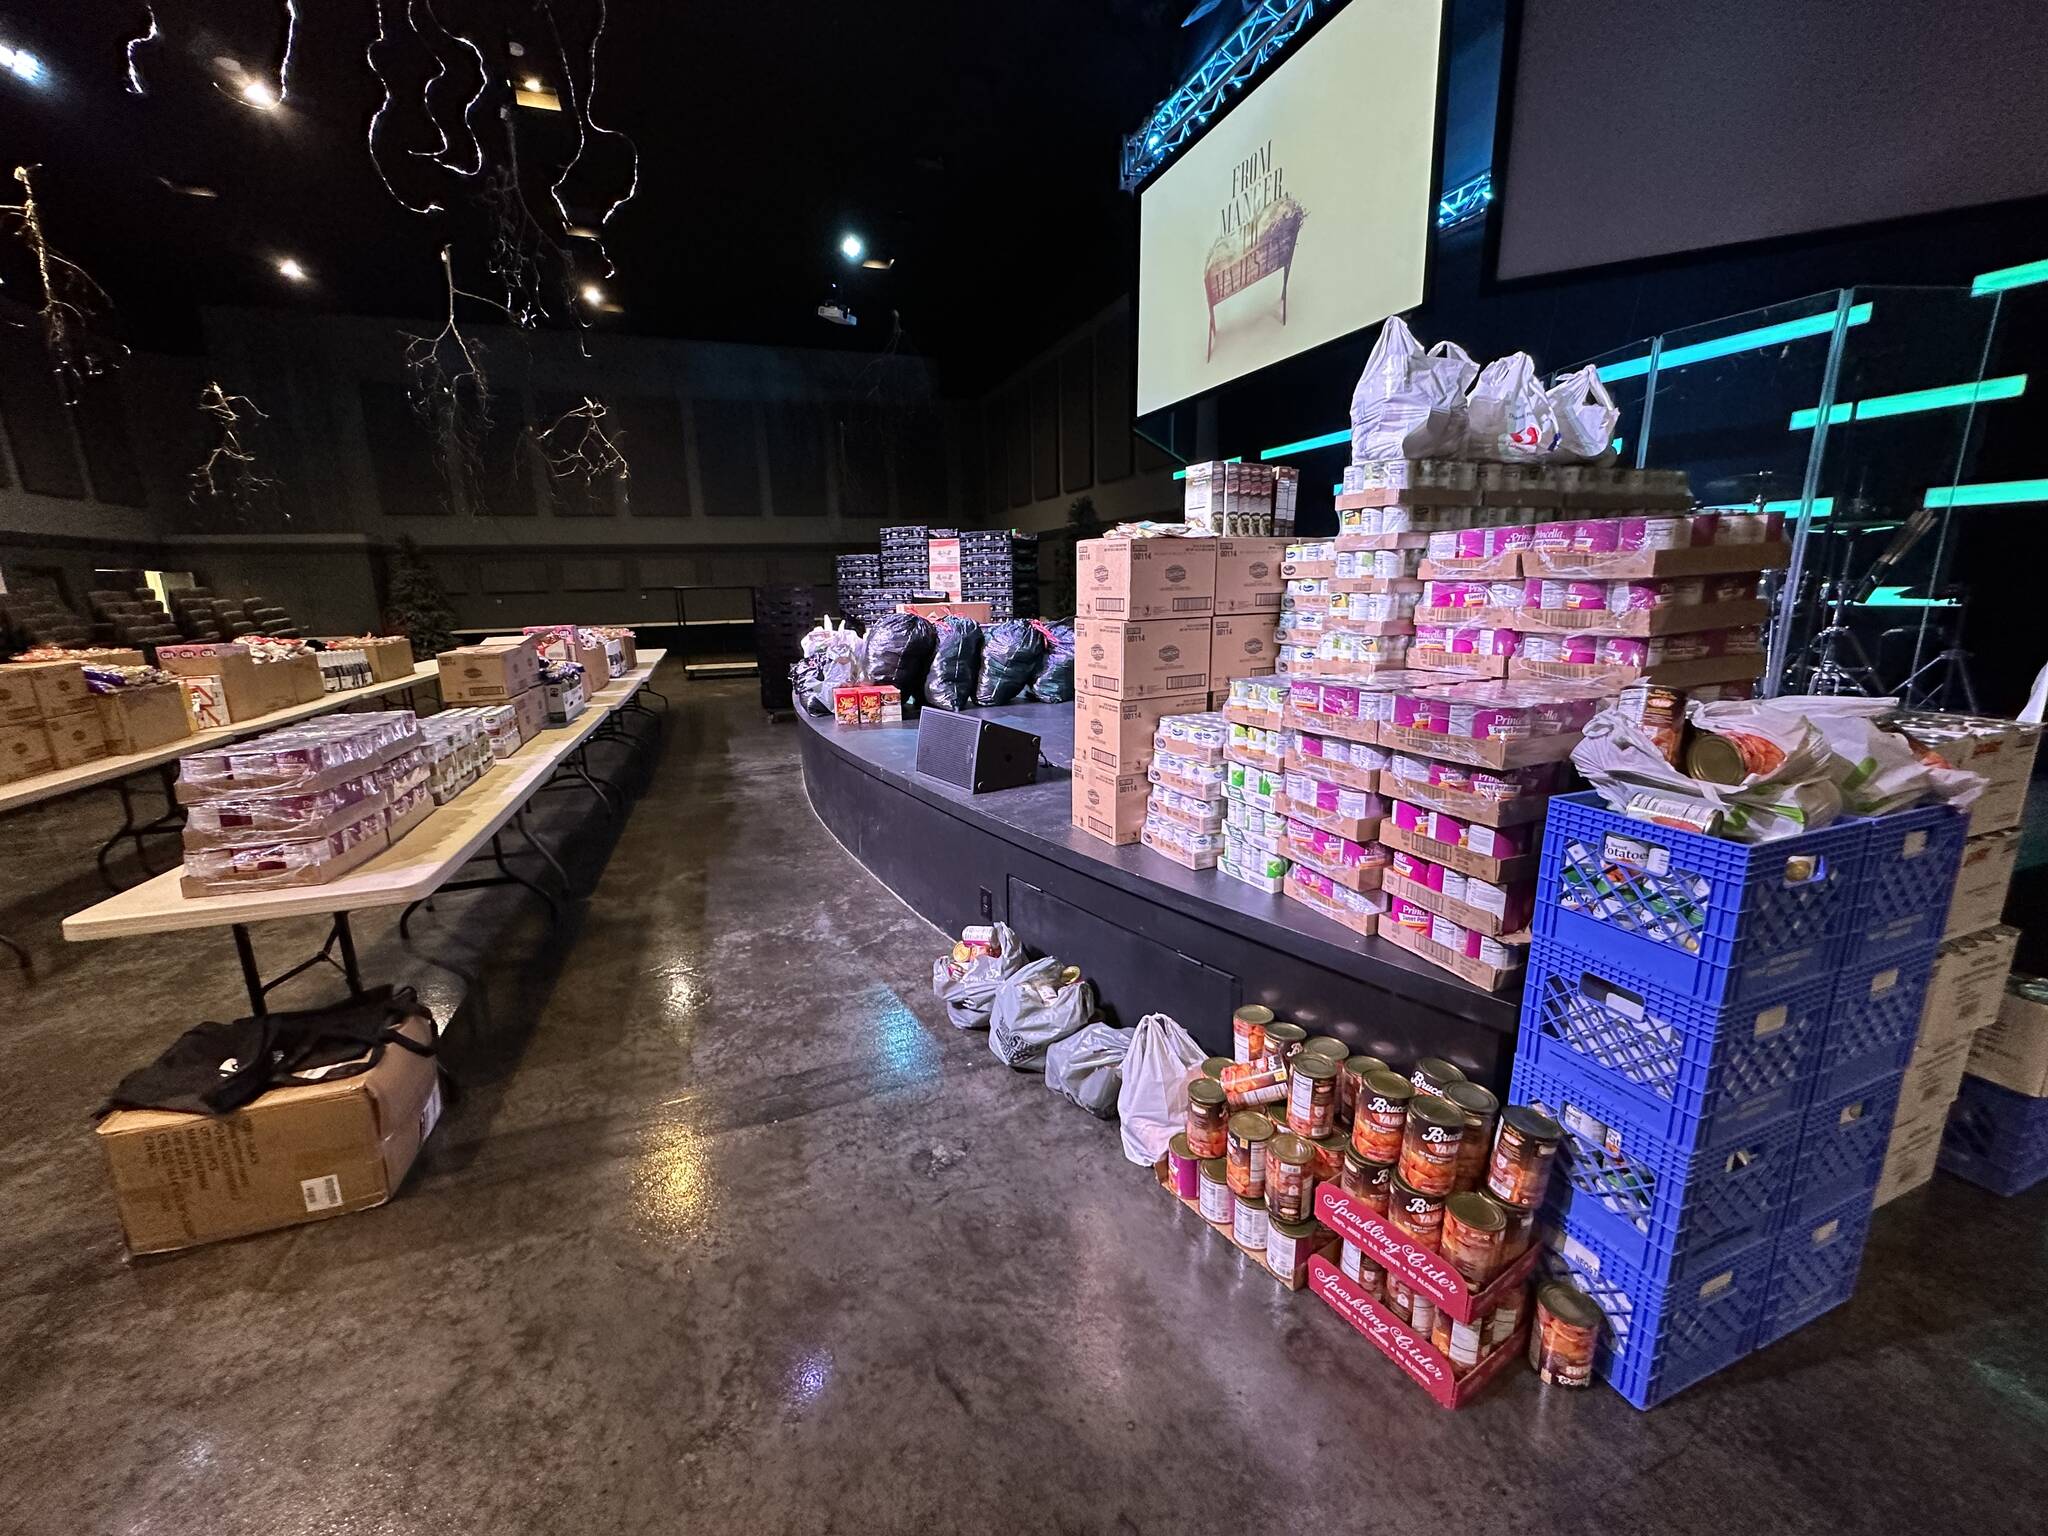 Life Church collected nearly 12,000 pounds of groceries to give to low-income families in Oak Harbor. (Photo provided)